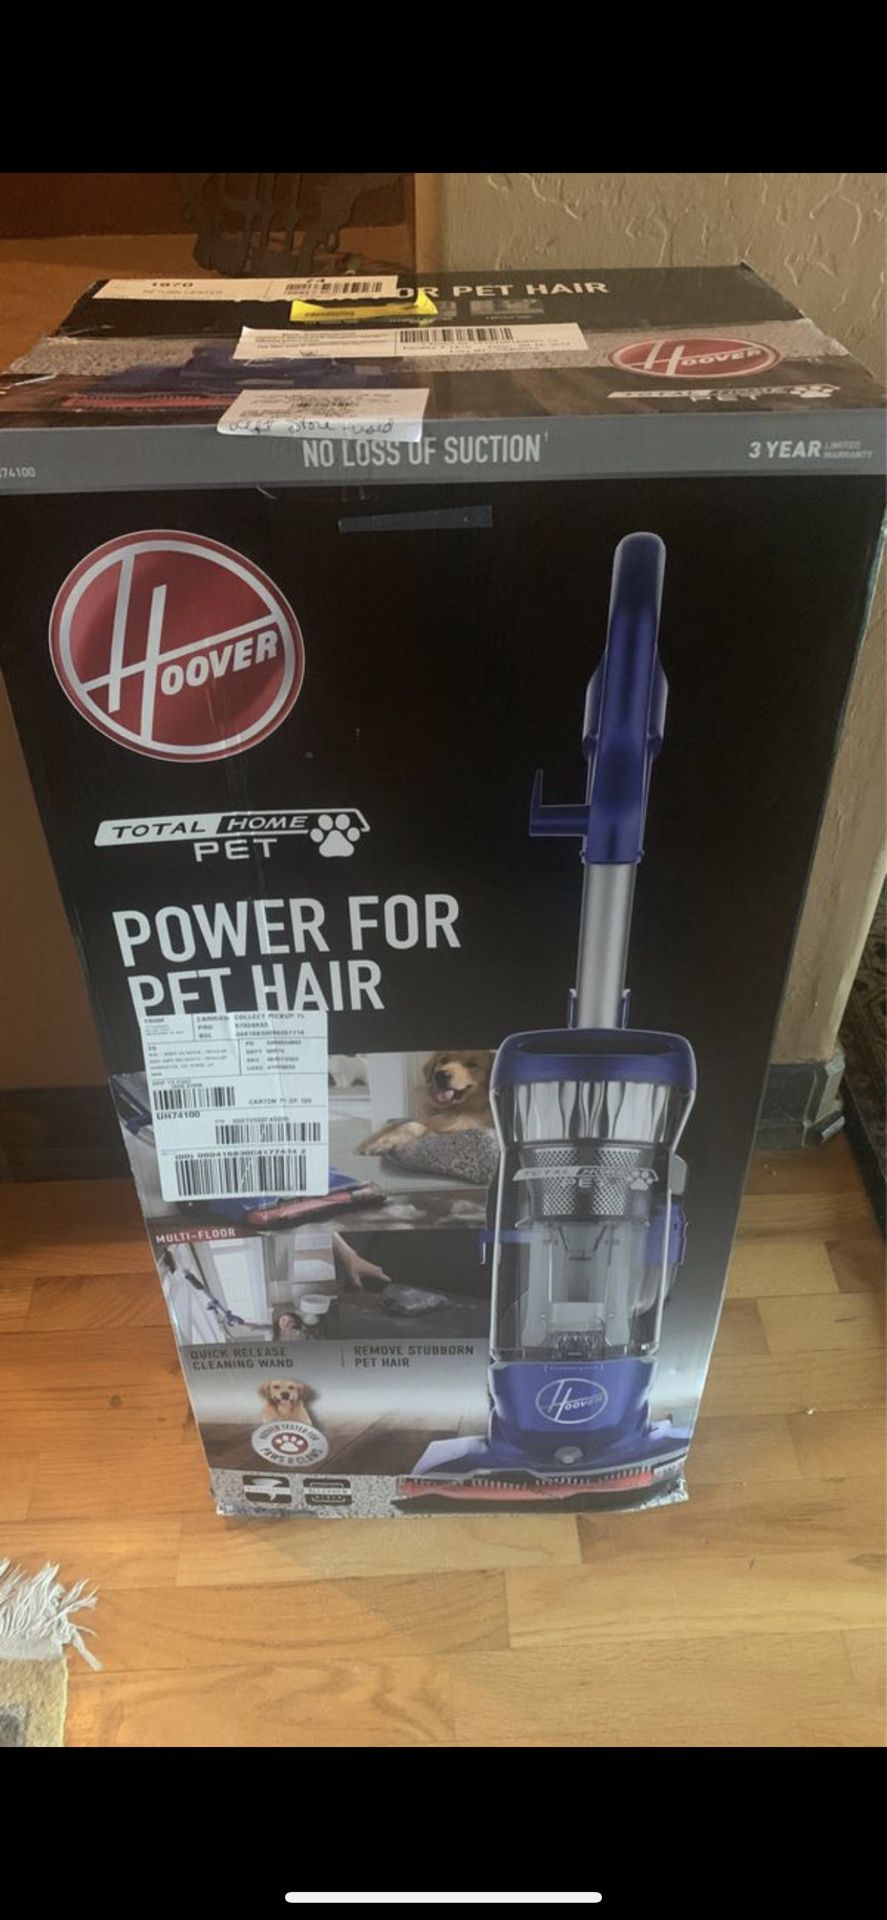 Hoover Total Home Pet Bagless Upright Vacuum Cleaner, UH74100